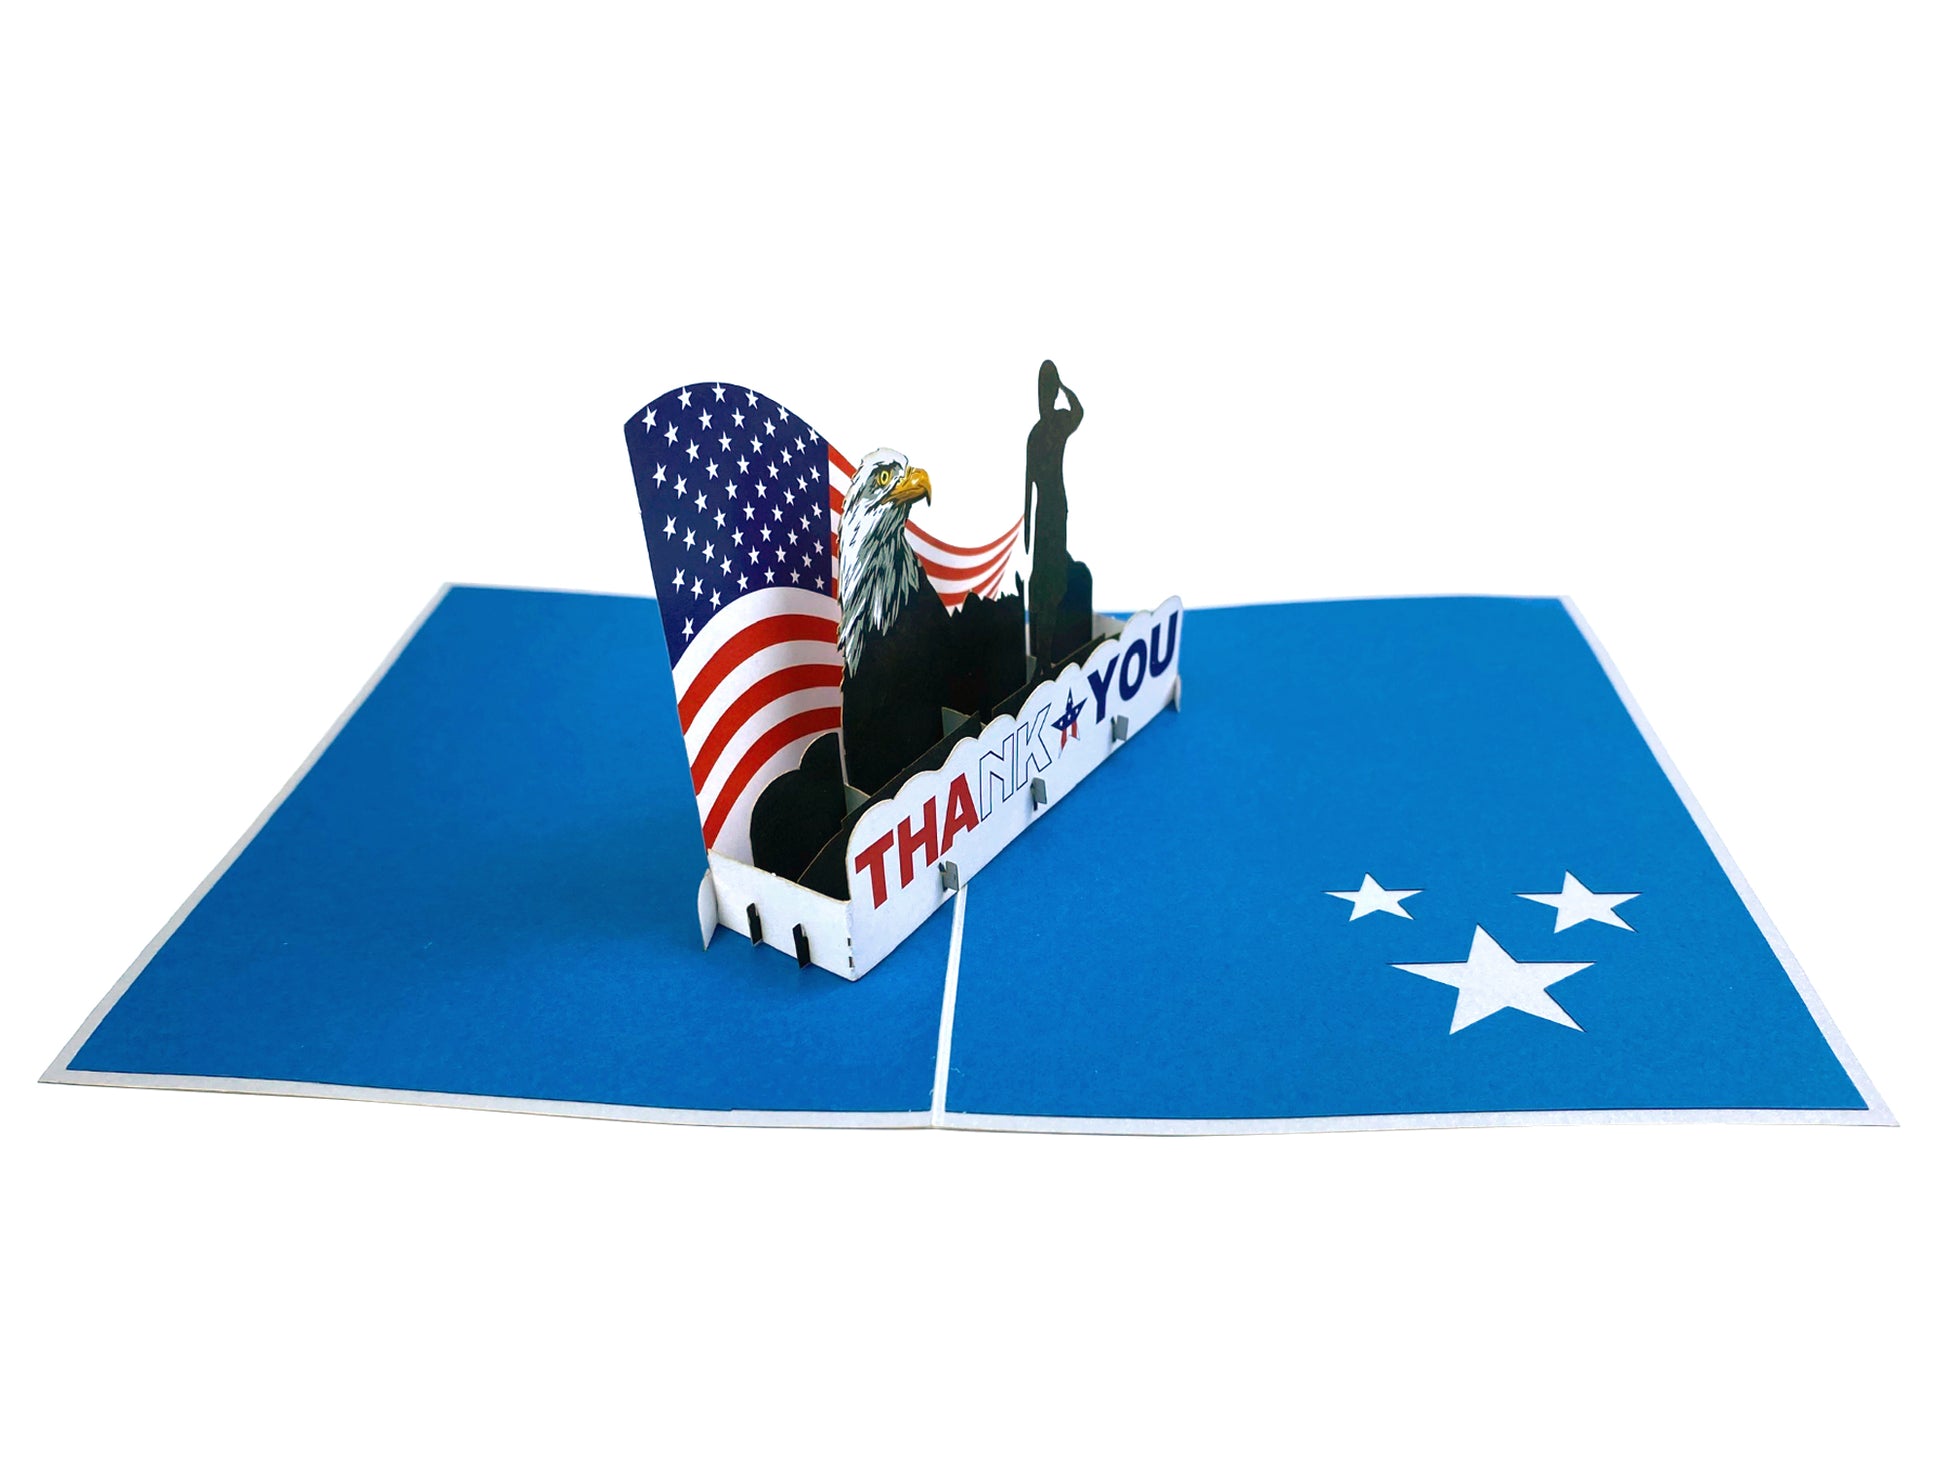 Military Man Thank You 3D Pop Up Greeting Card - appreciation - memorial day - military - thank you - iGifts And Cards